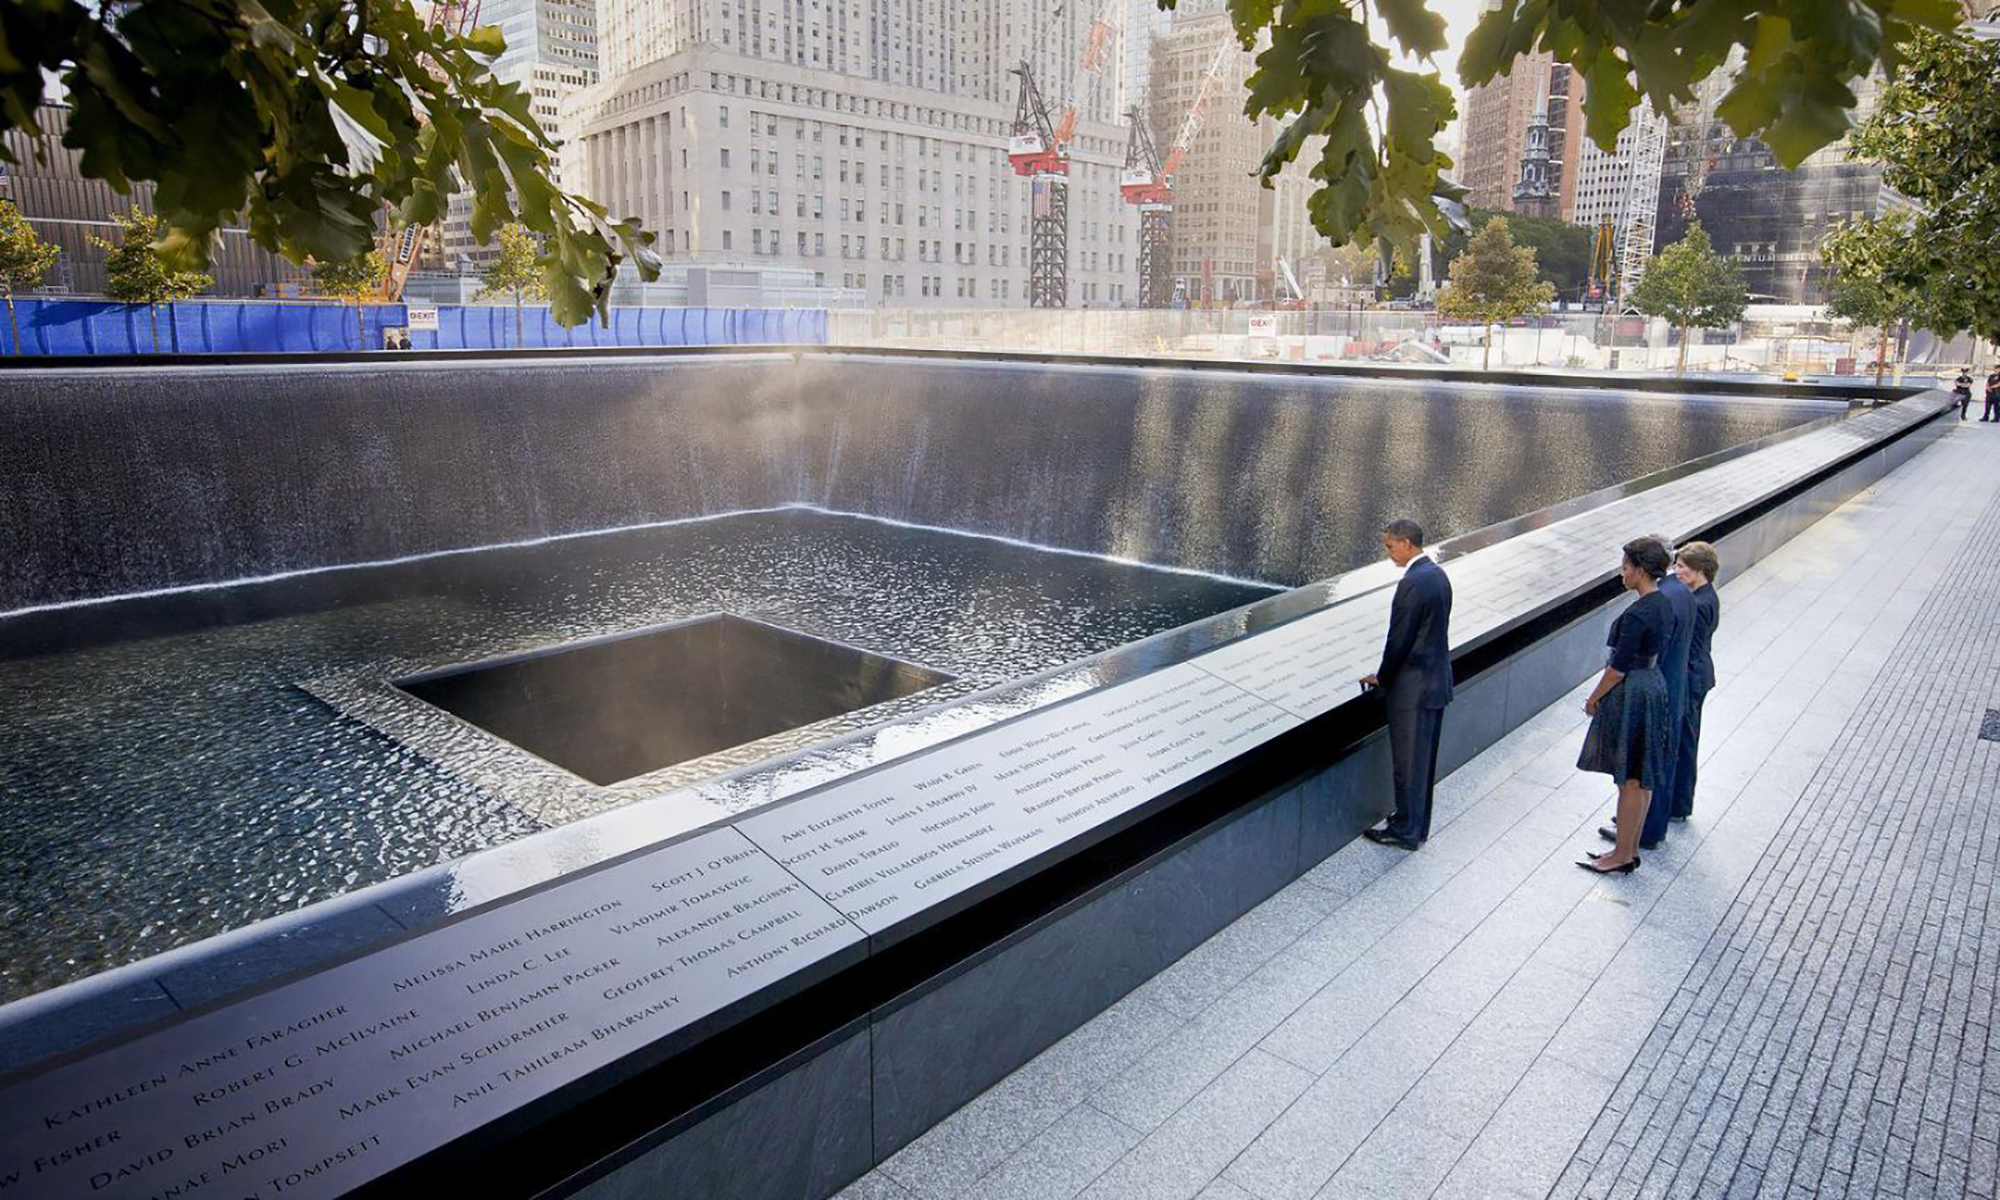 New York-based design studio Local Projects is the project designer for the National September 11 Memorial & Museum.